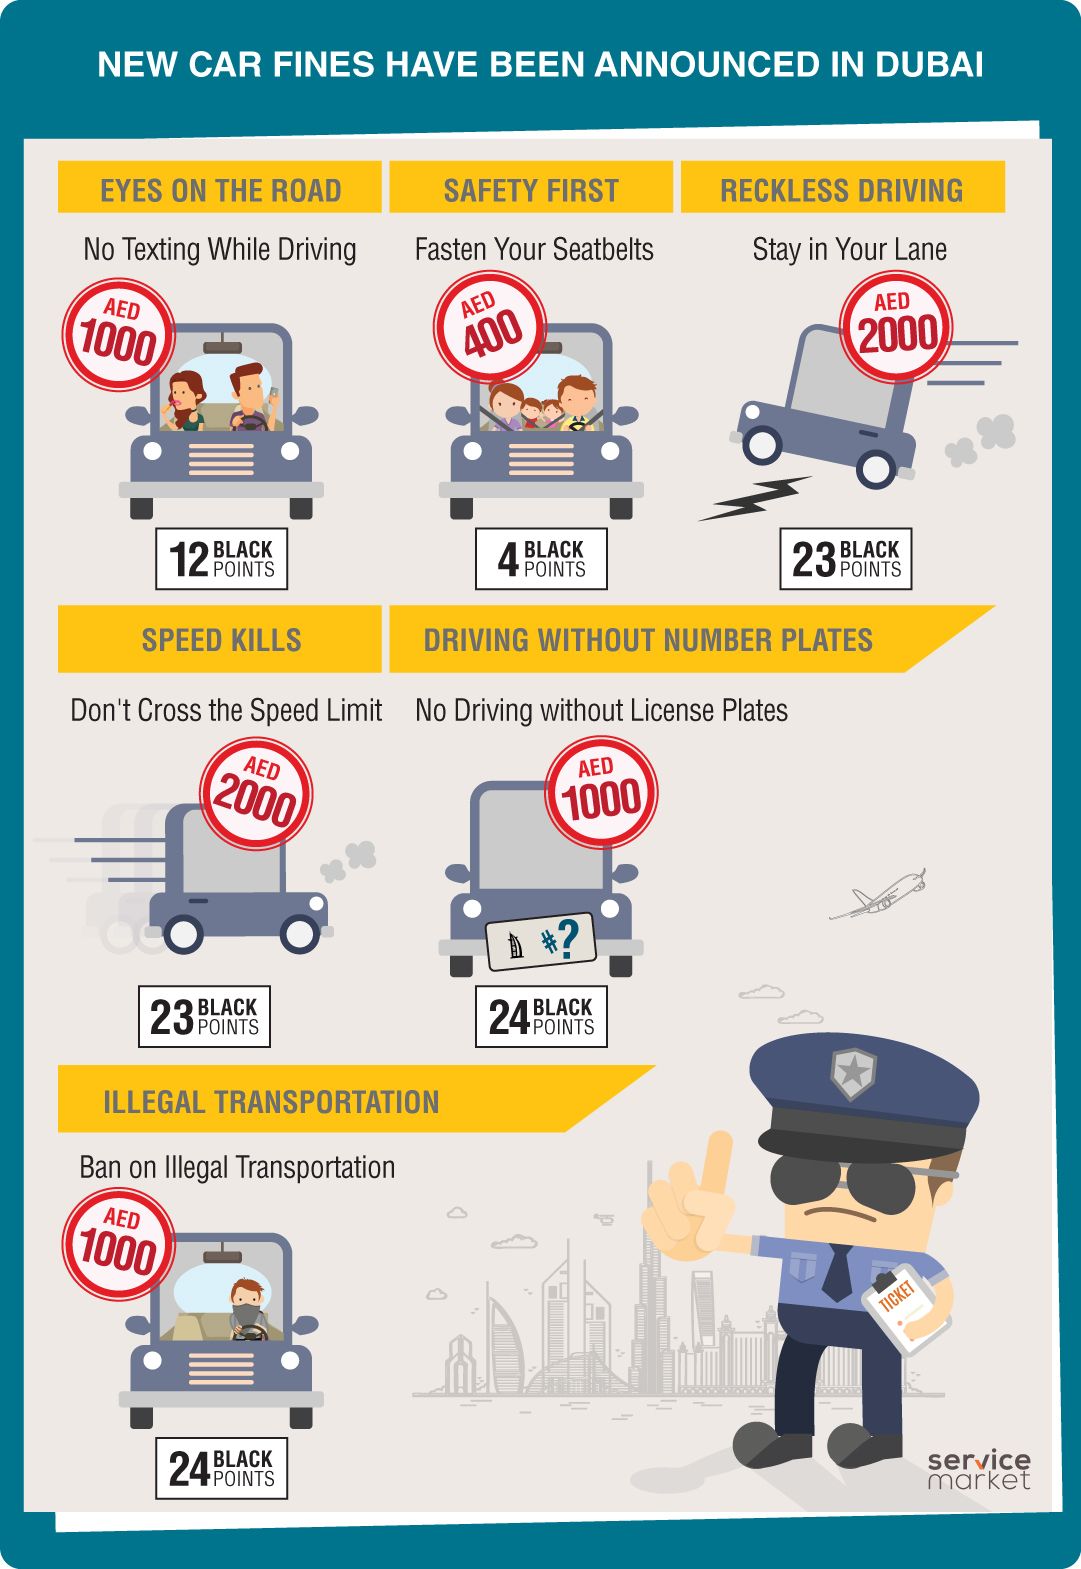 New car rules and fines in Dubai - Infographic 